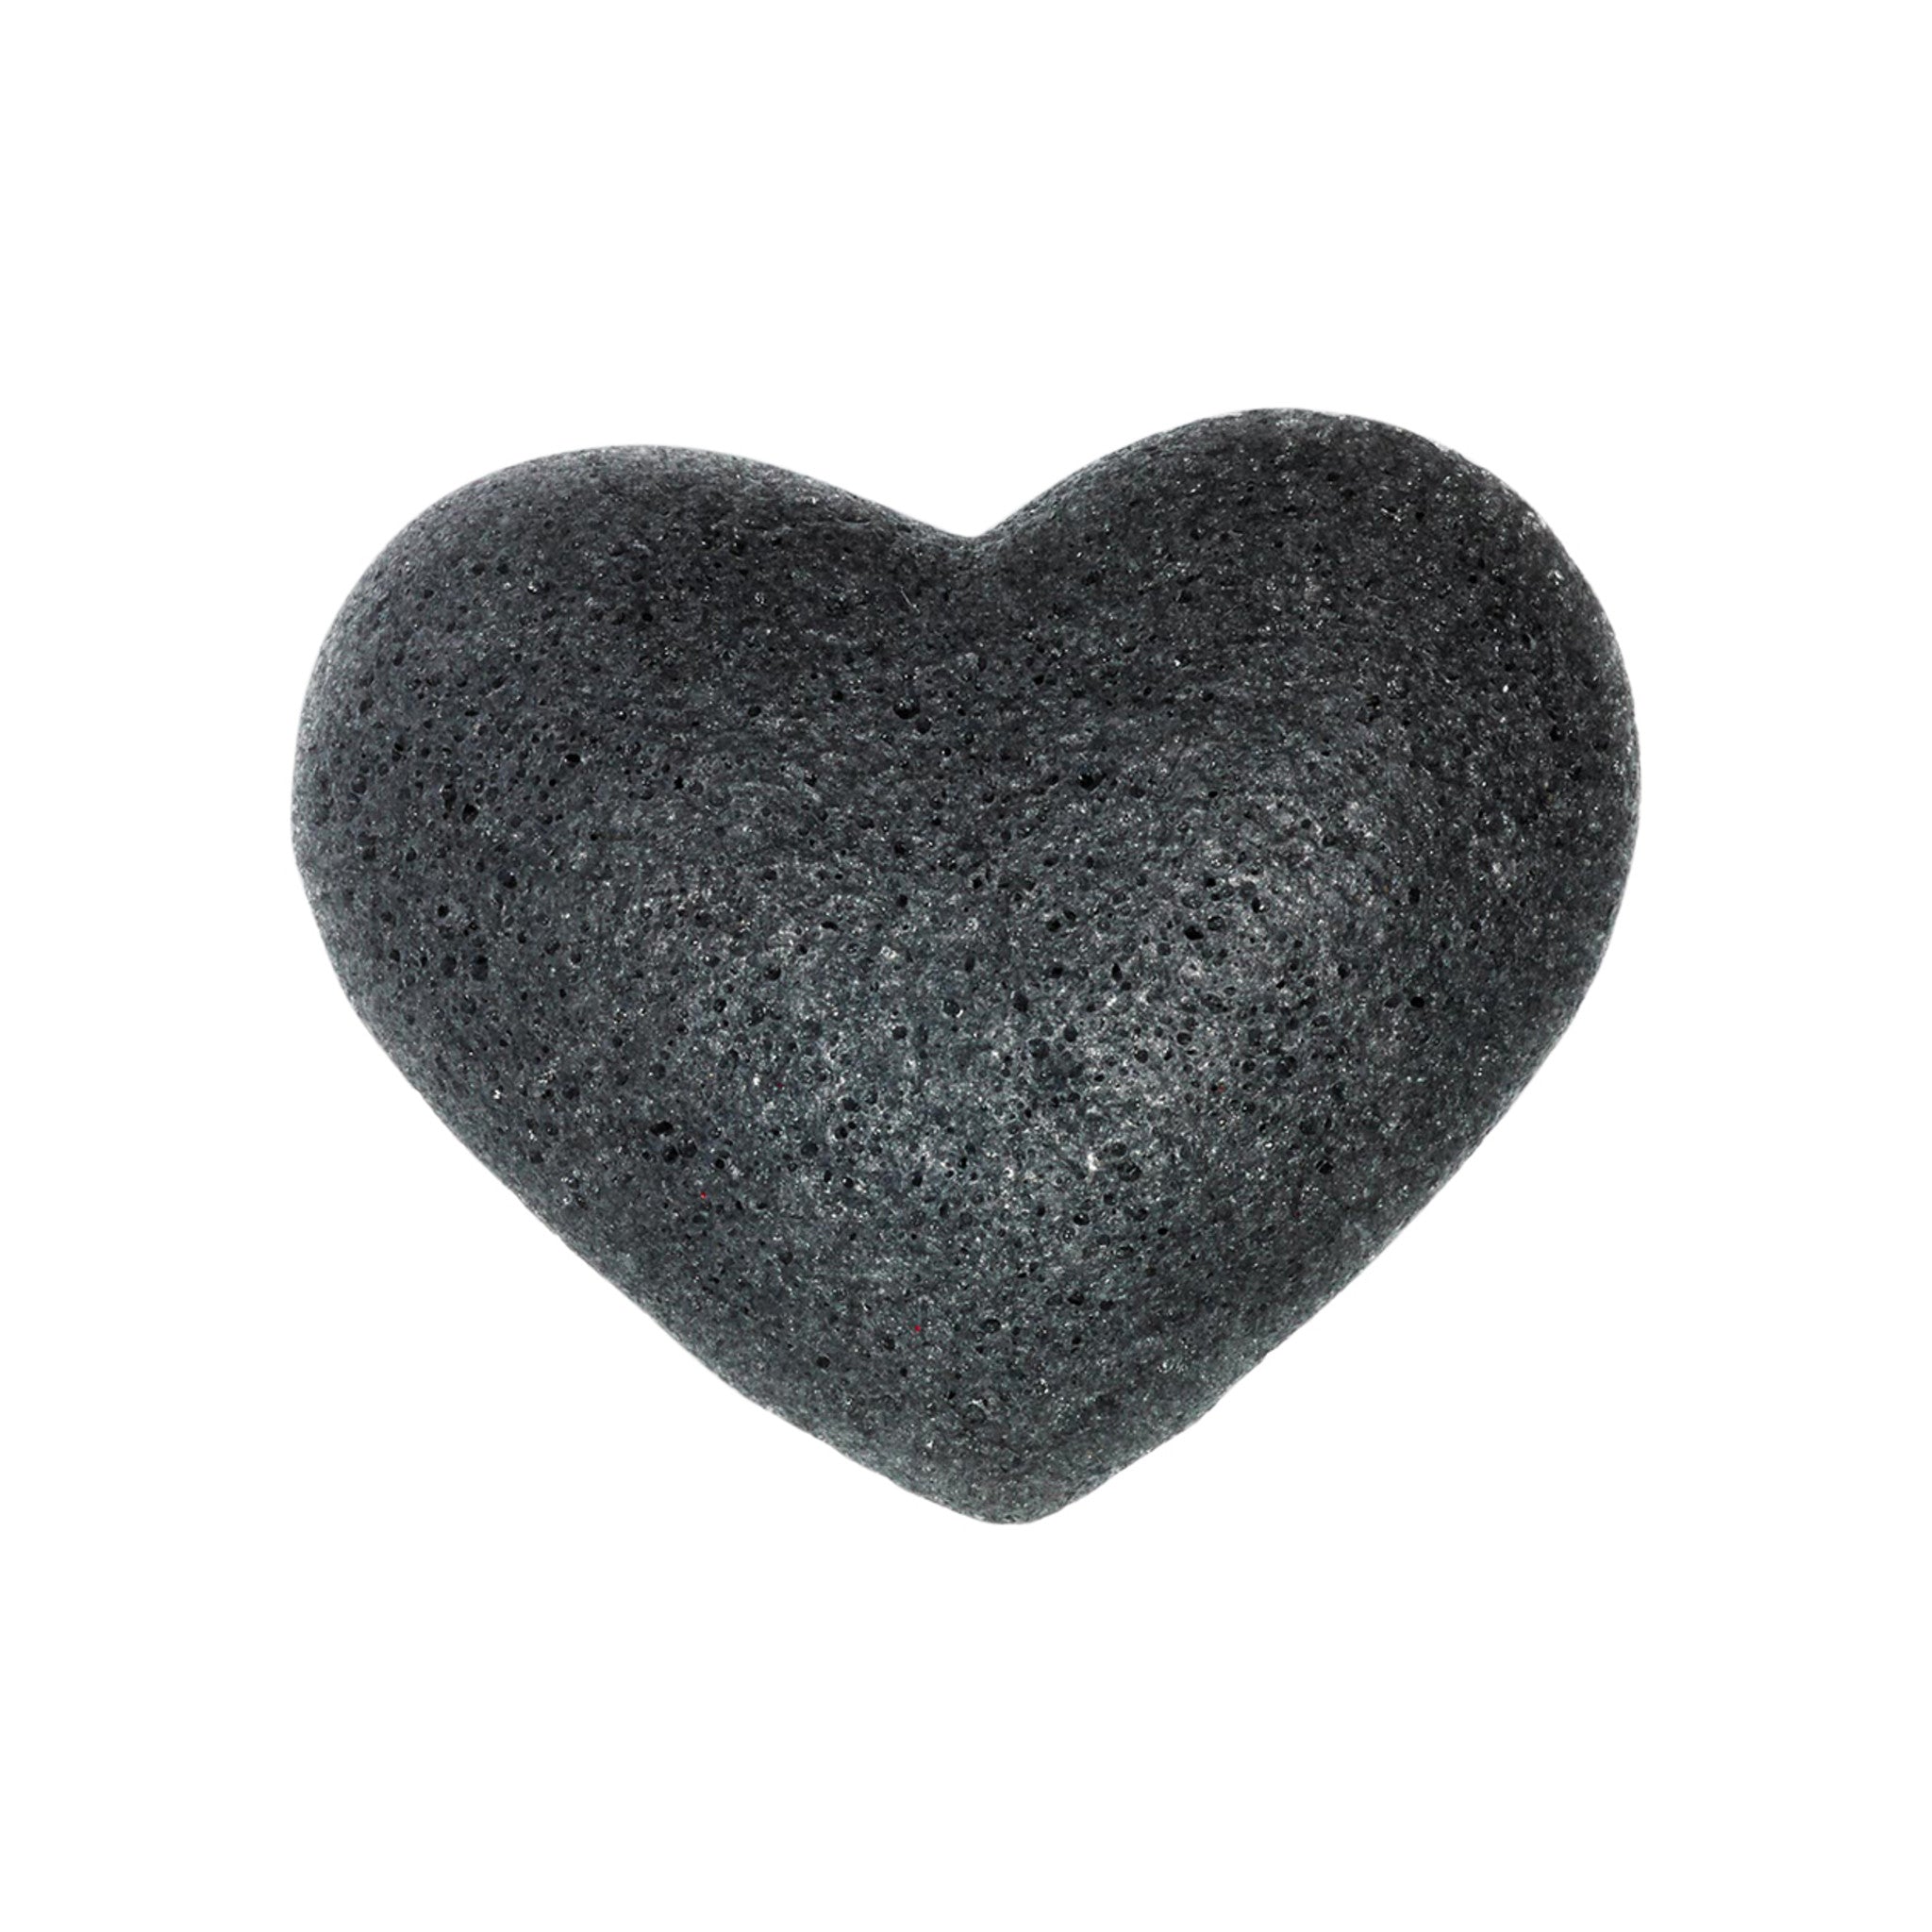 The Cleansing Sponge Bamboo Charcoal Heart main image.